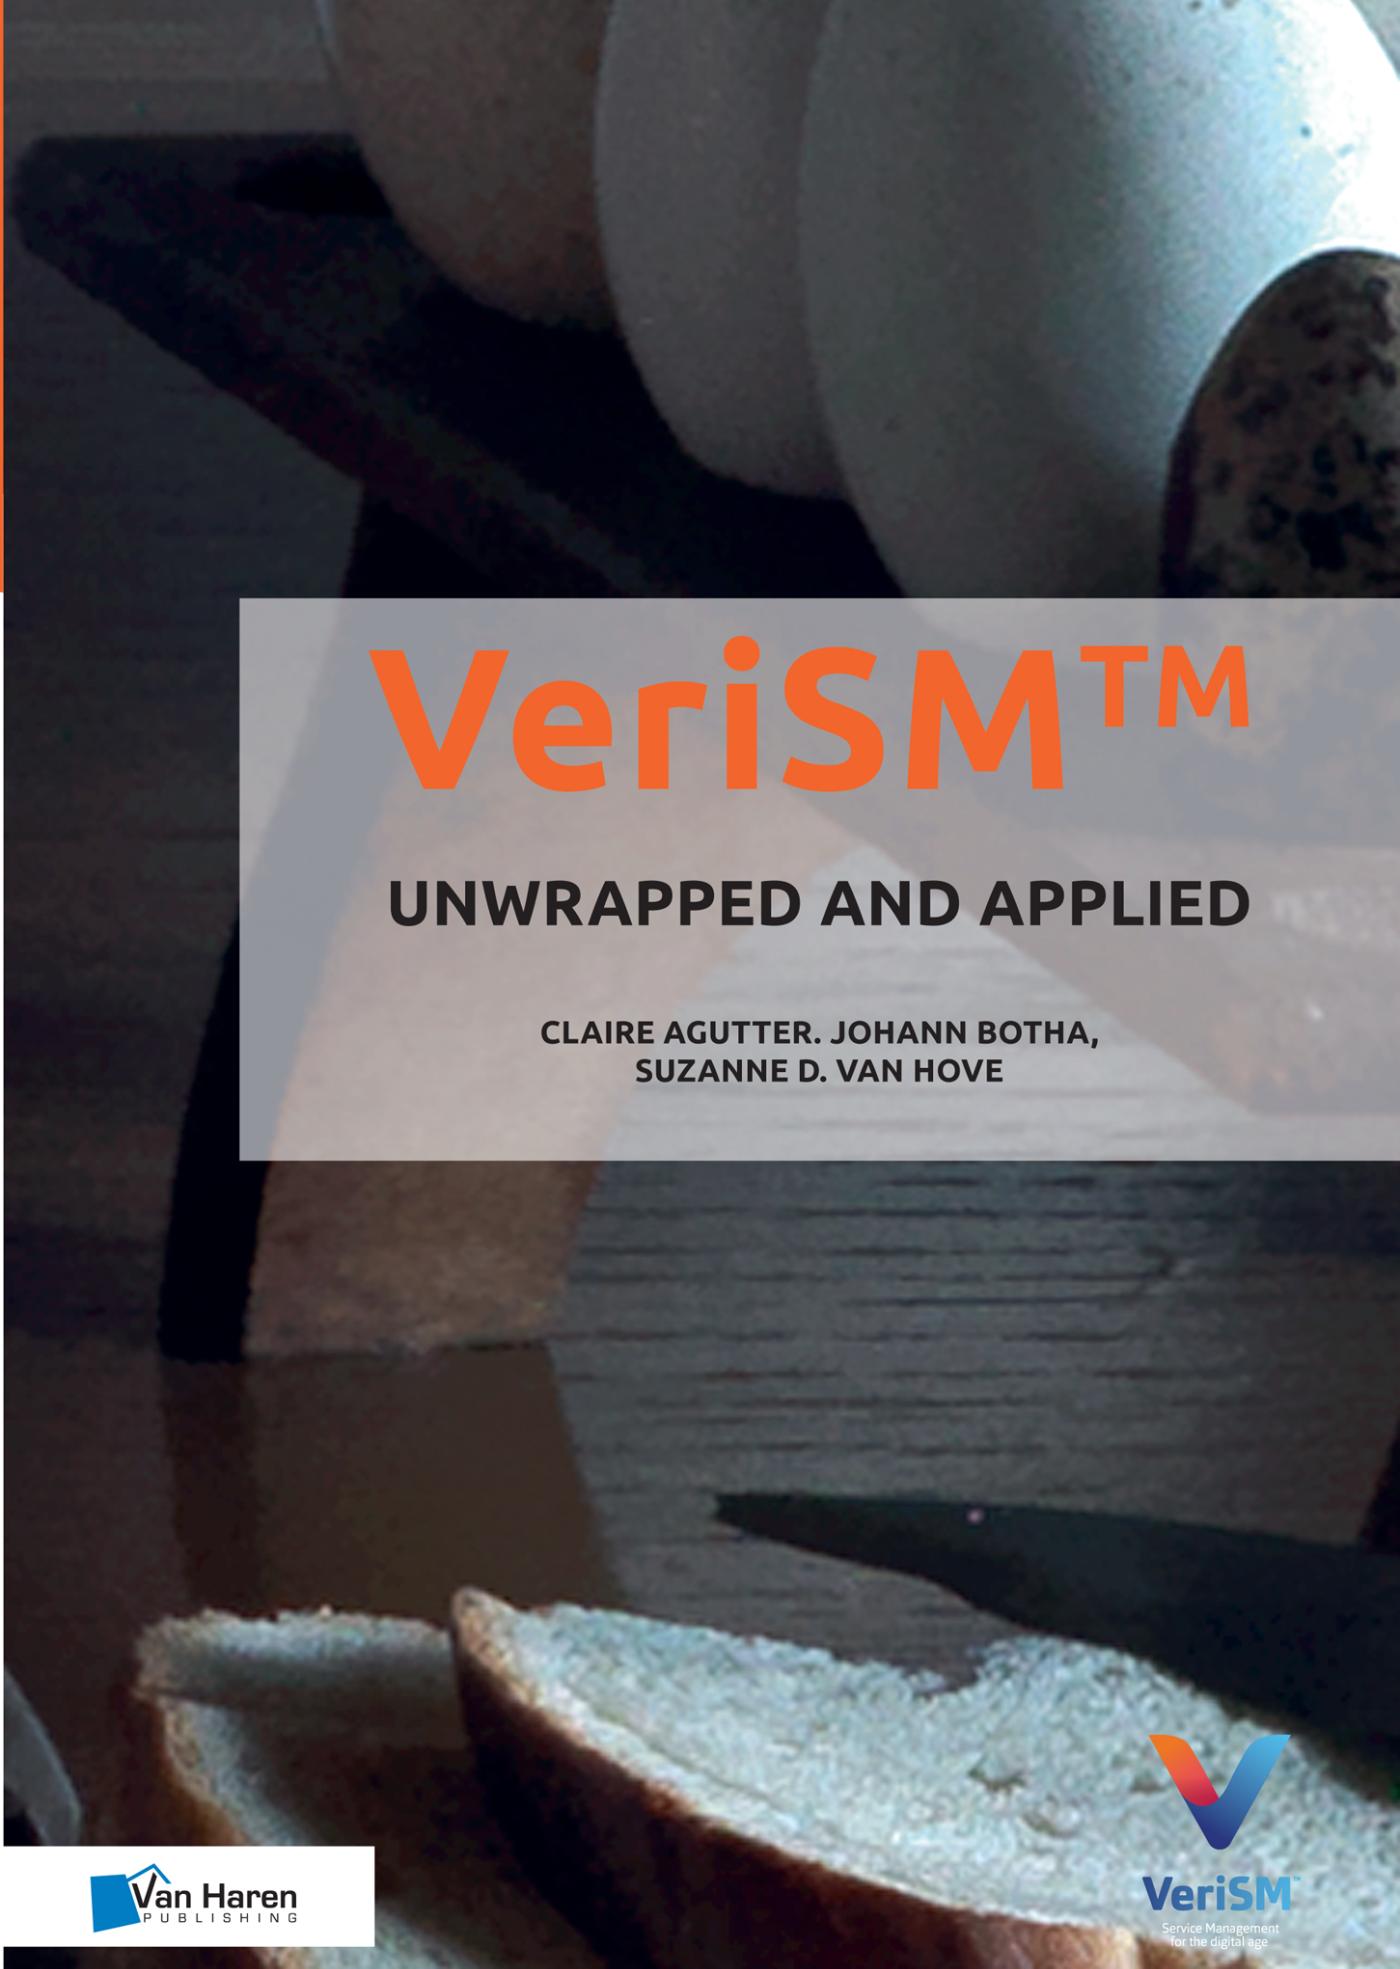 VeriSMTM - unwrapped and applied